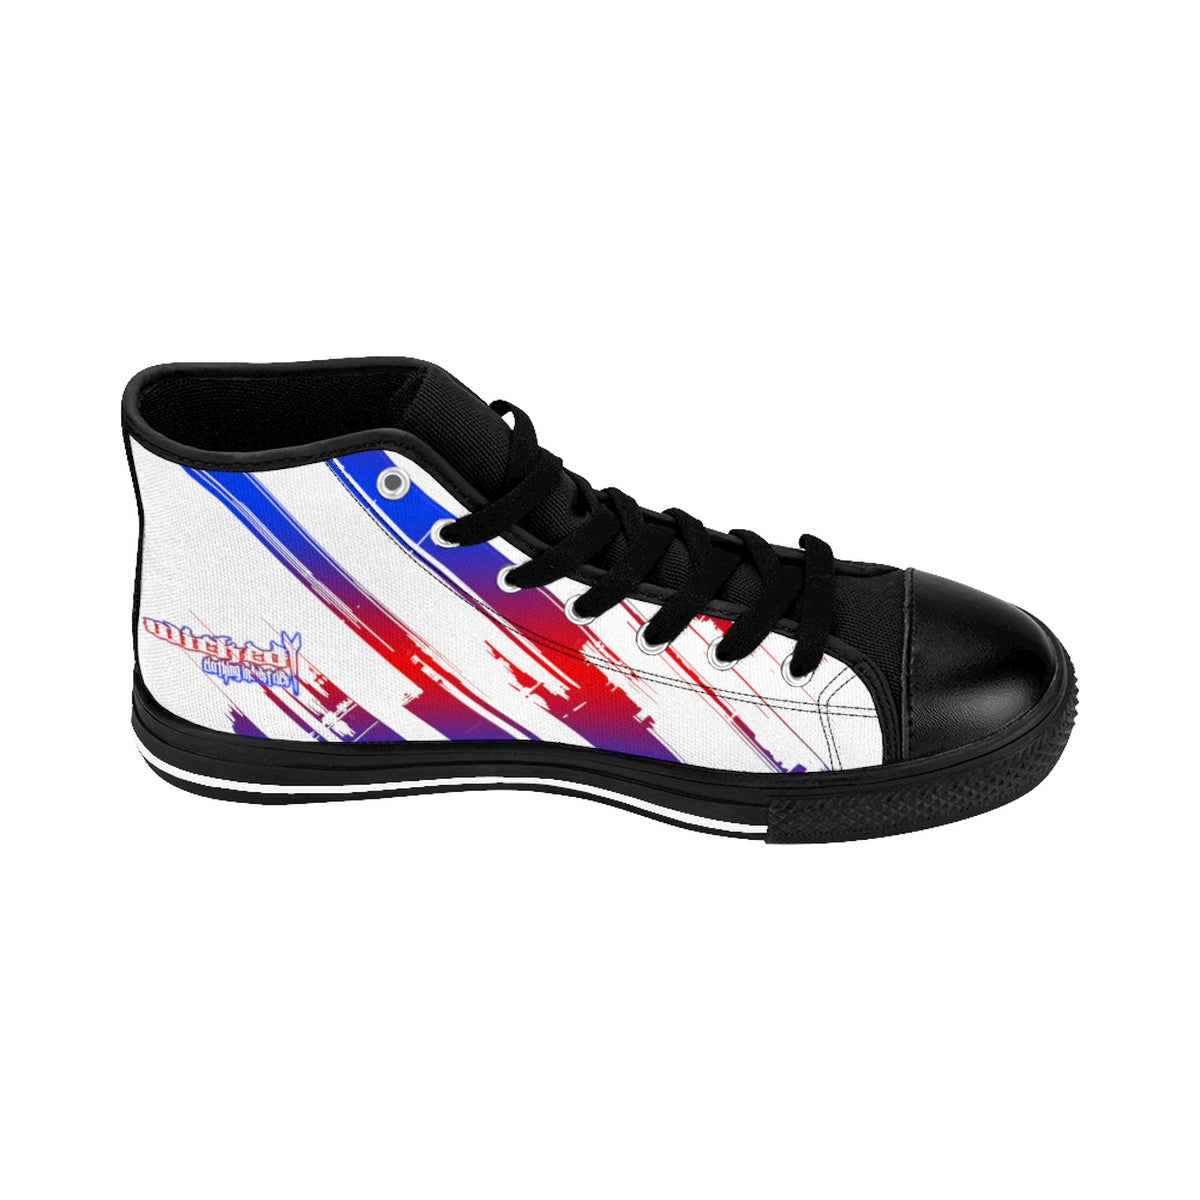 The Edge Of Insanity / Blue & Red / Men's High-top Sneakers